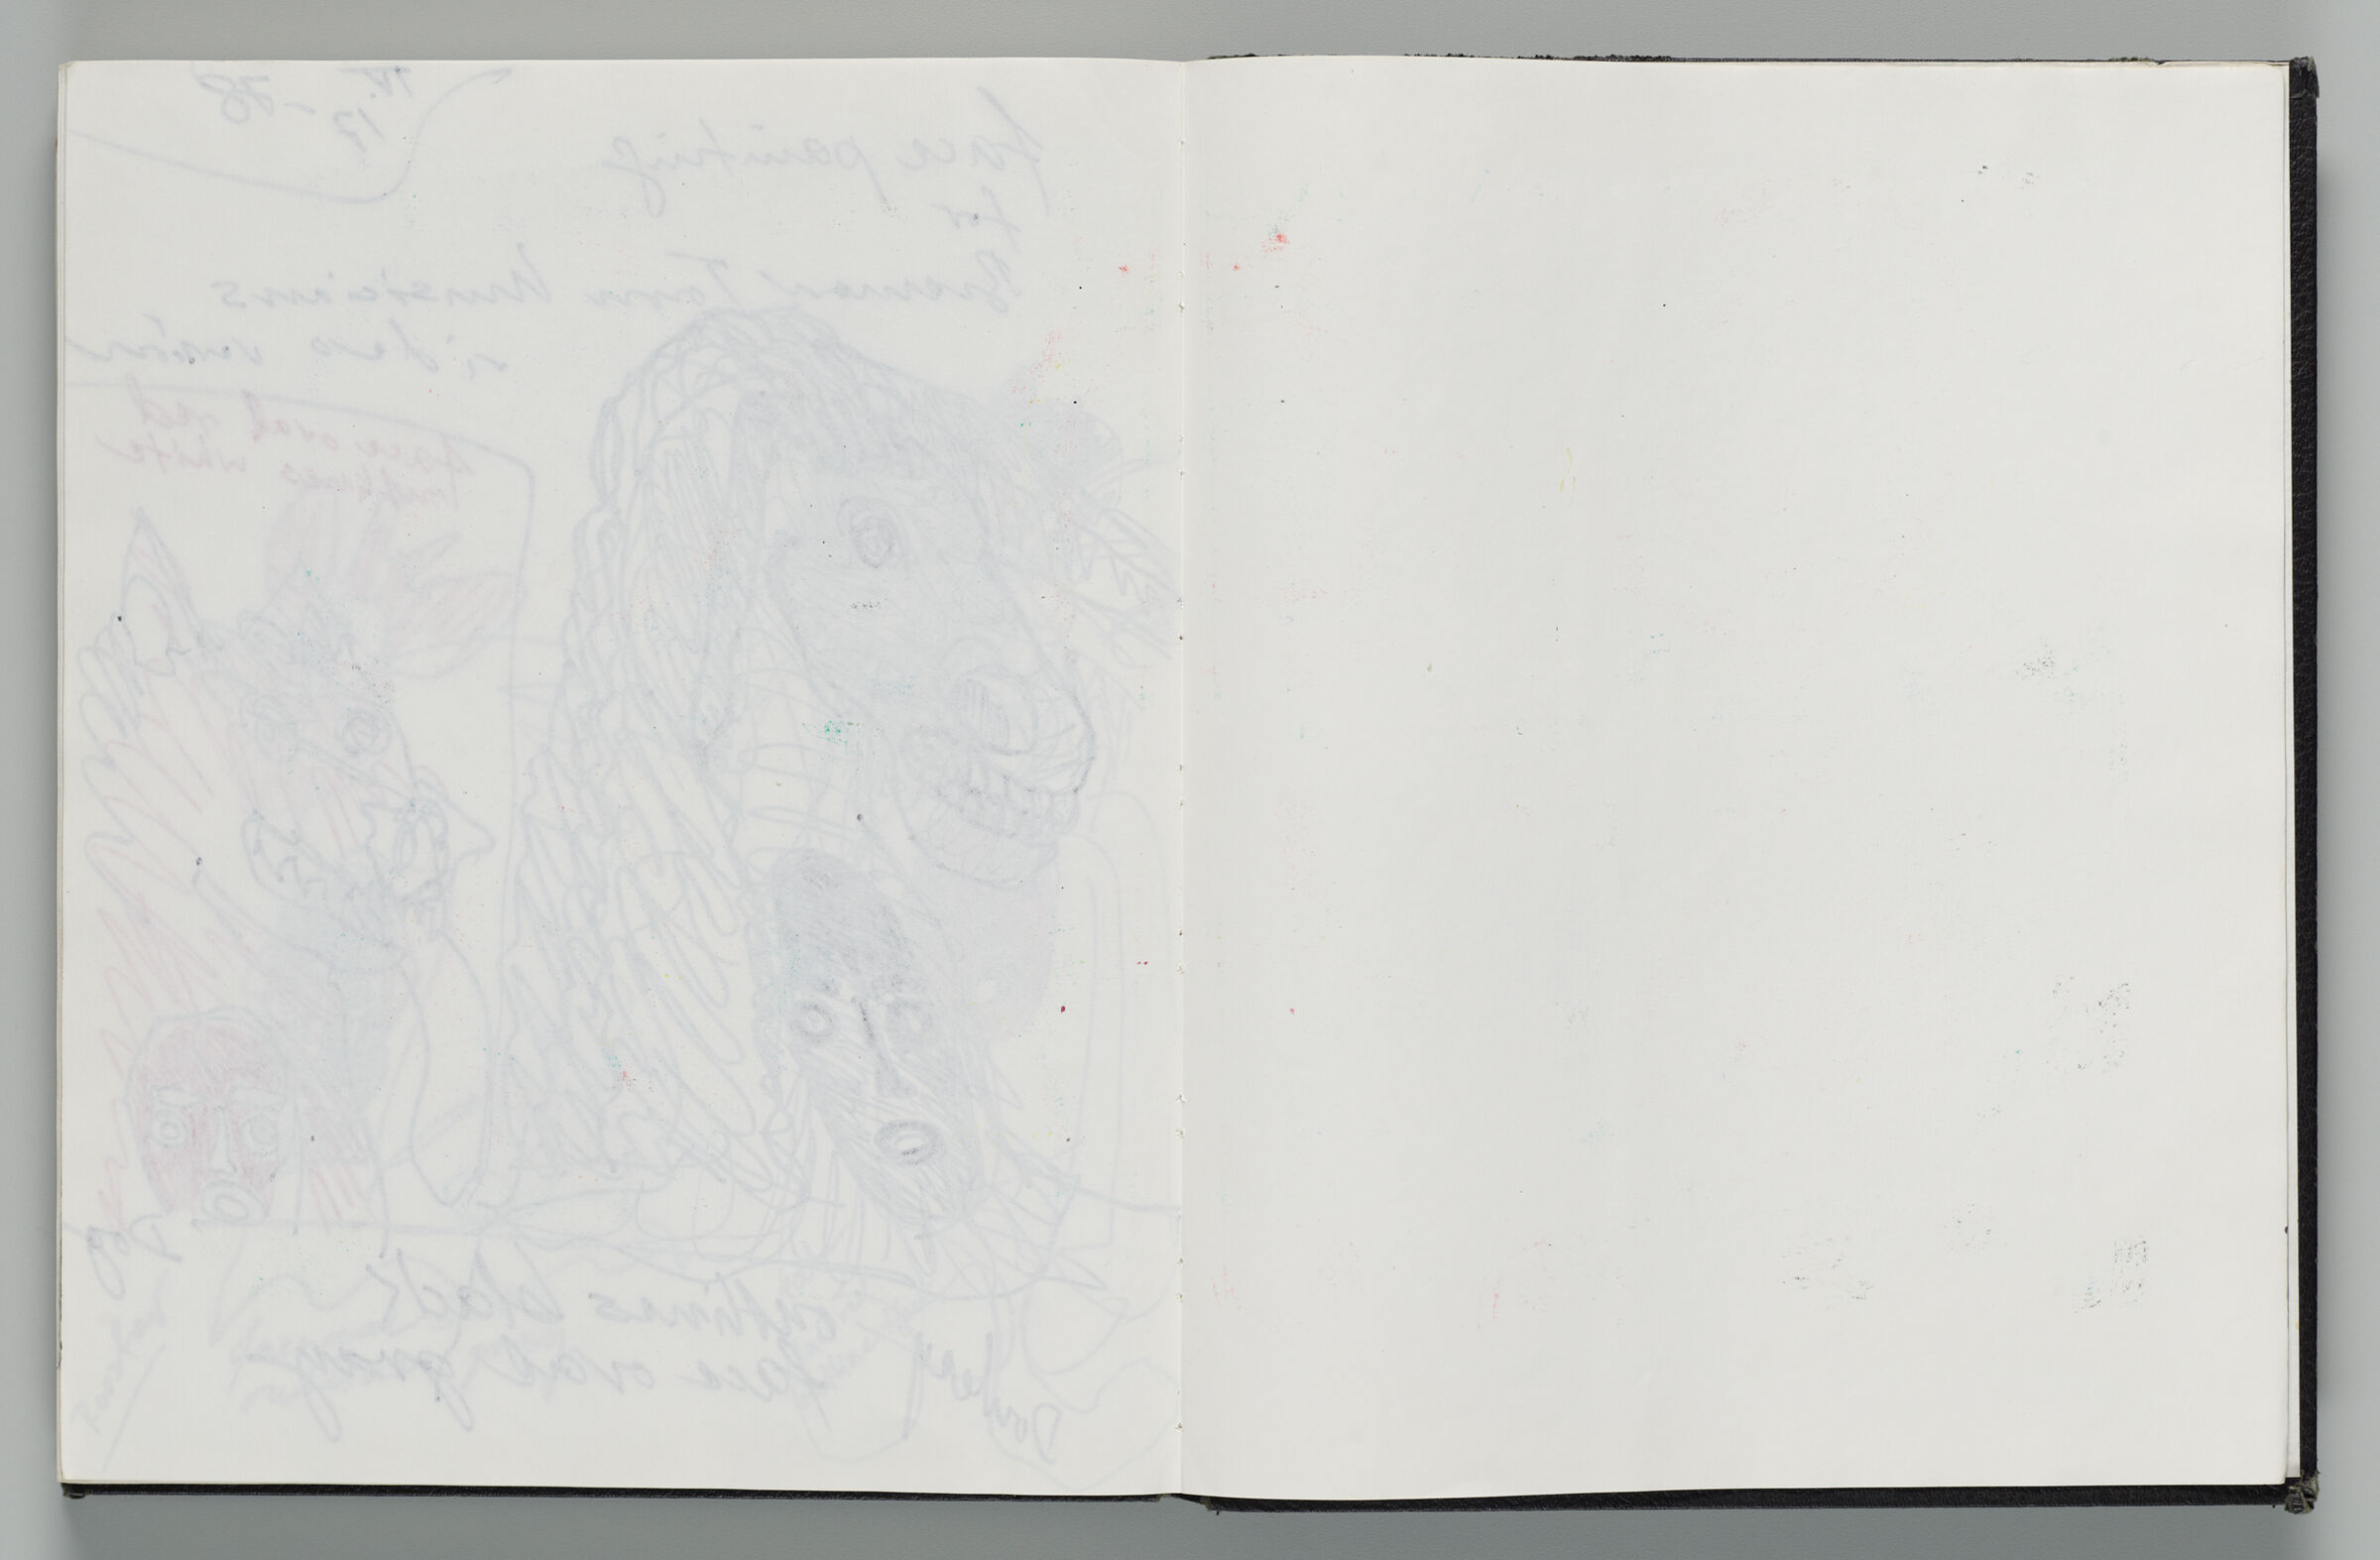 Untitled (Blank, Left Page); Untitled (Blank, Right Page)